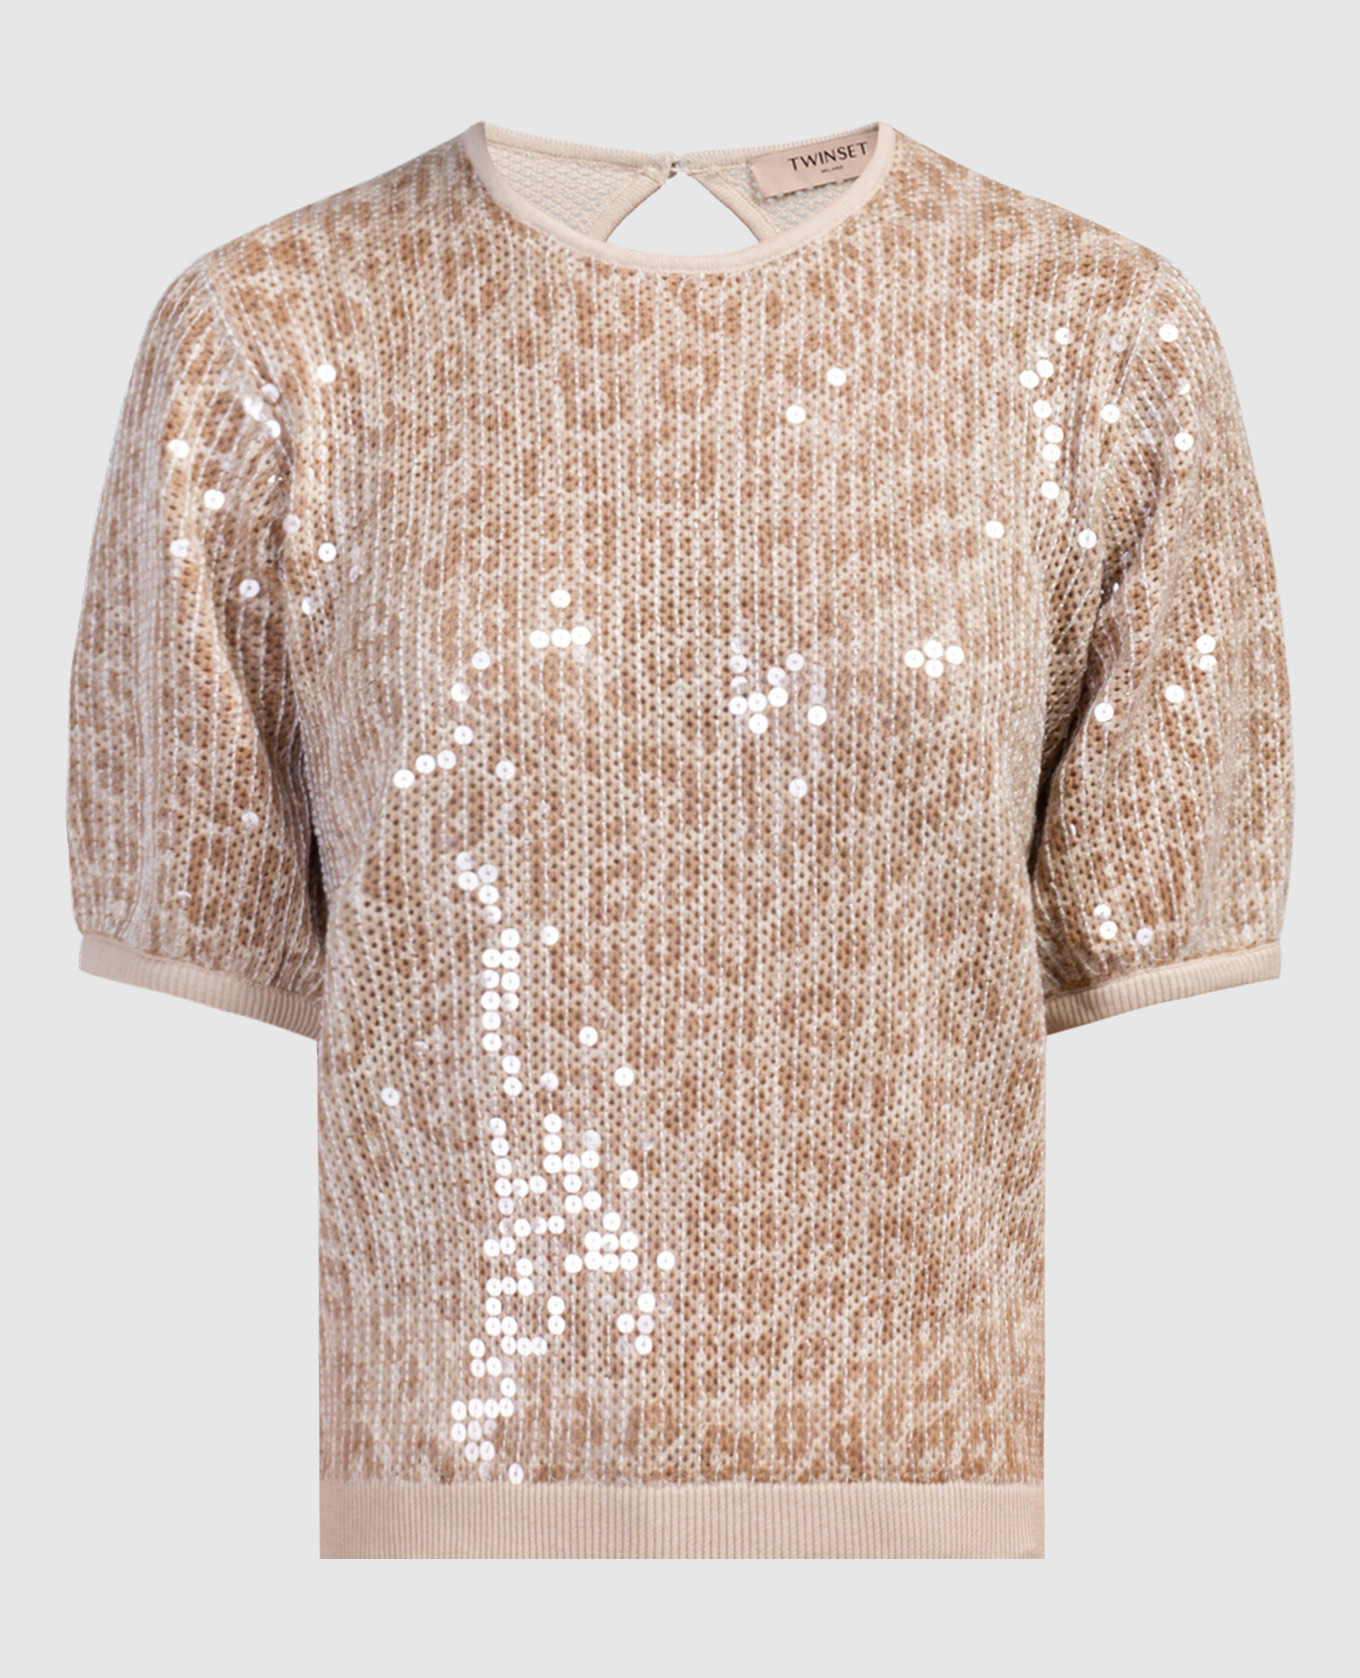 Brown animal print t-shirt with sequins